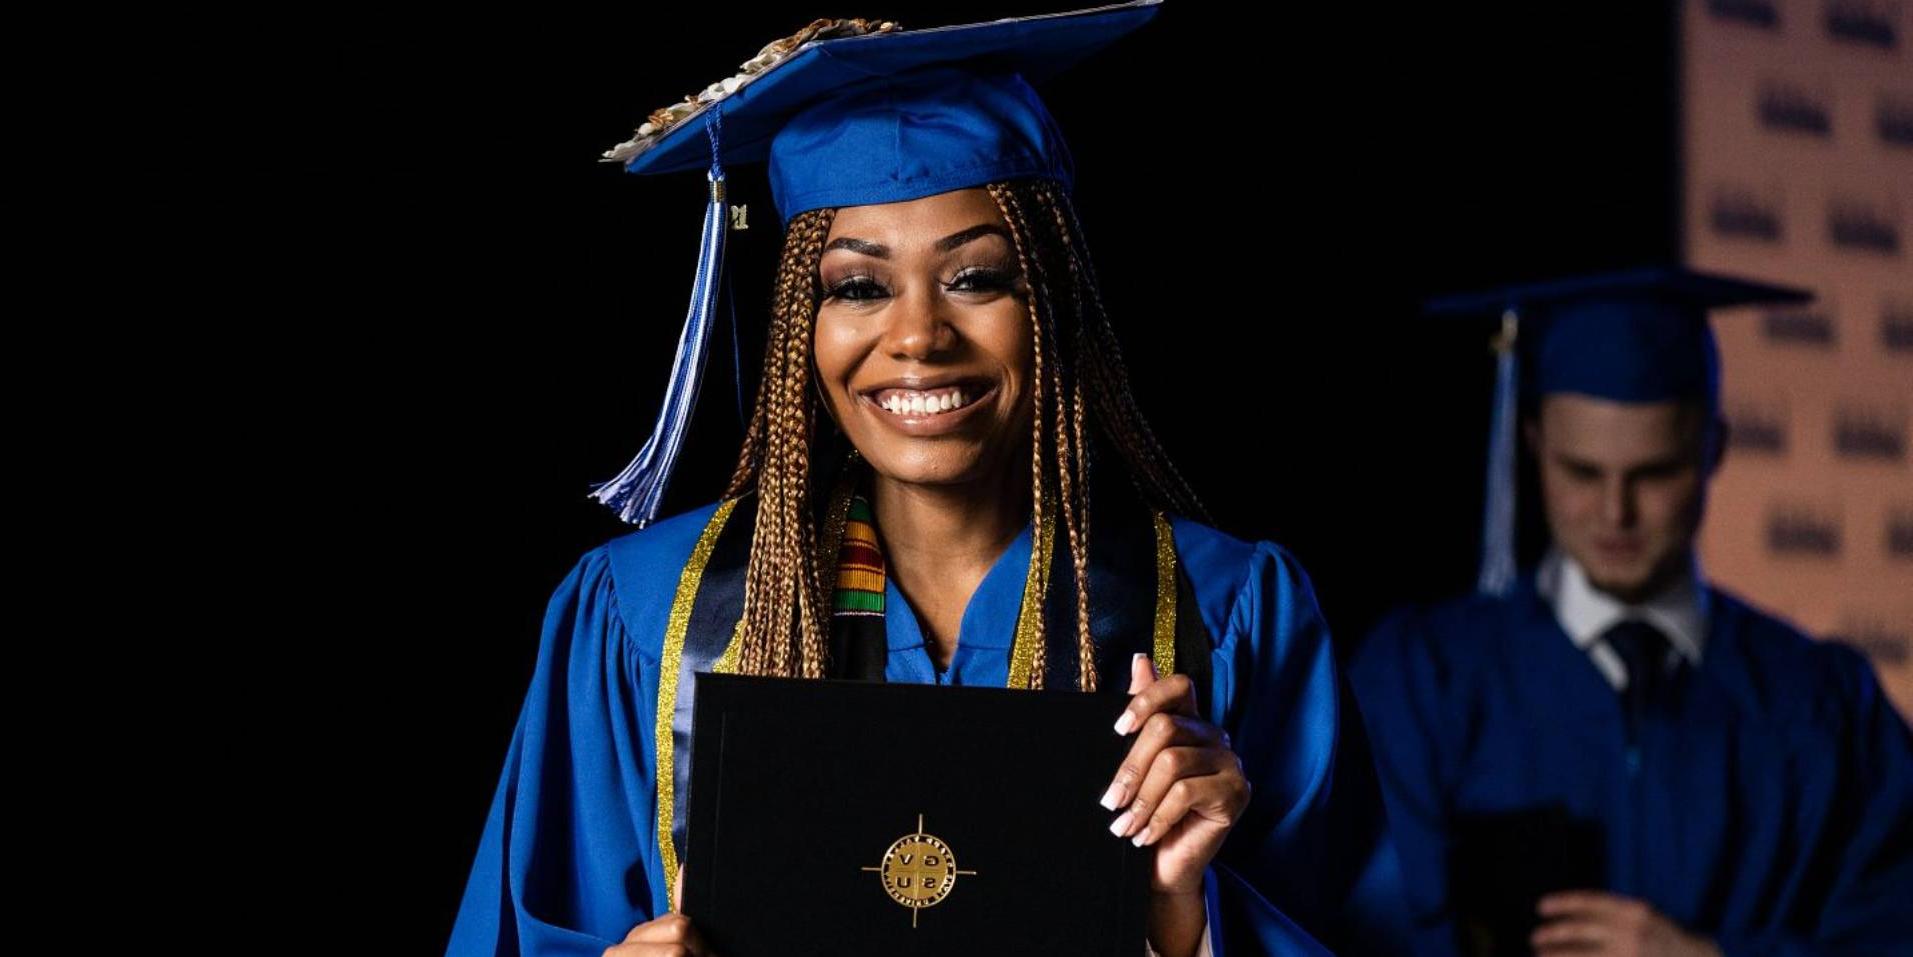 Woman smiling during graduation with diploma in hand